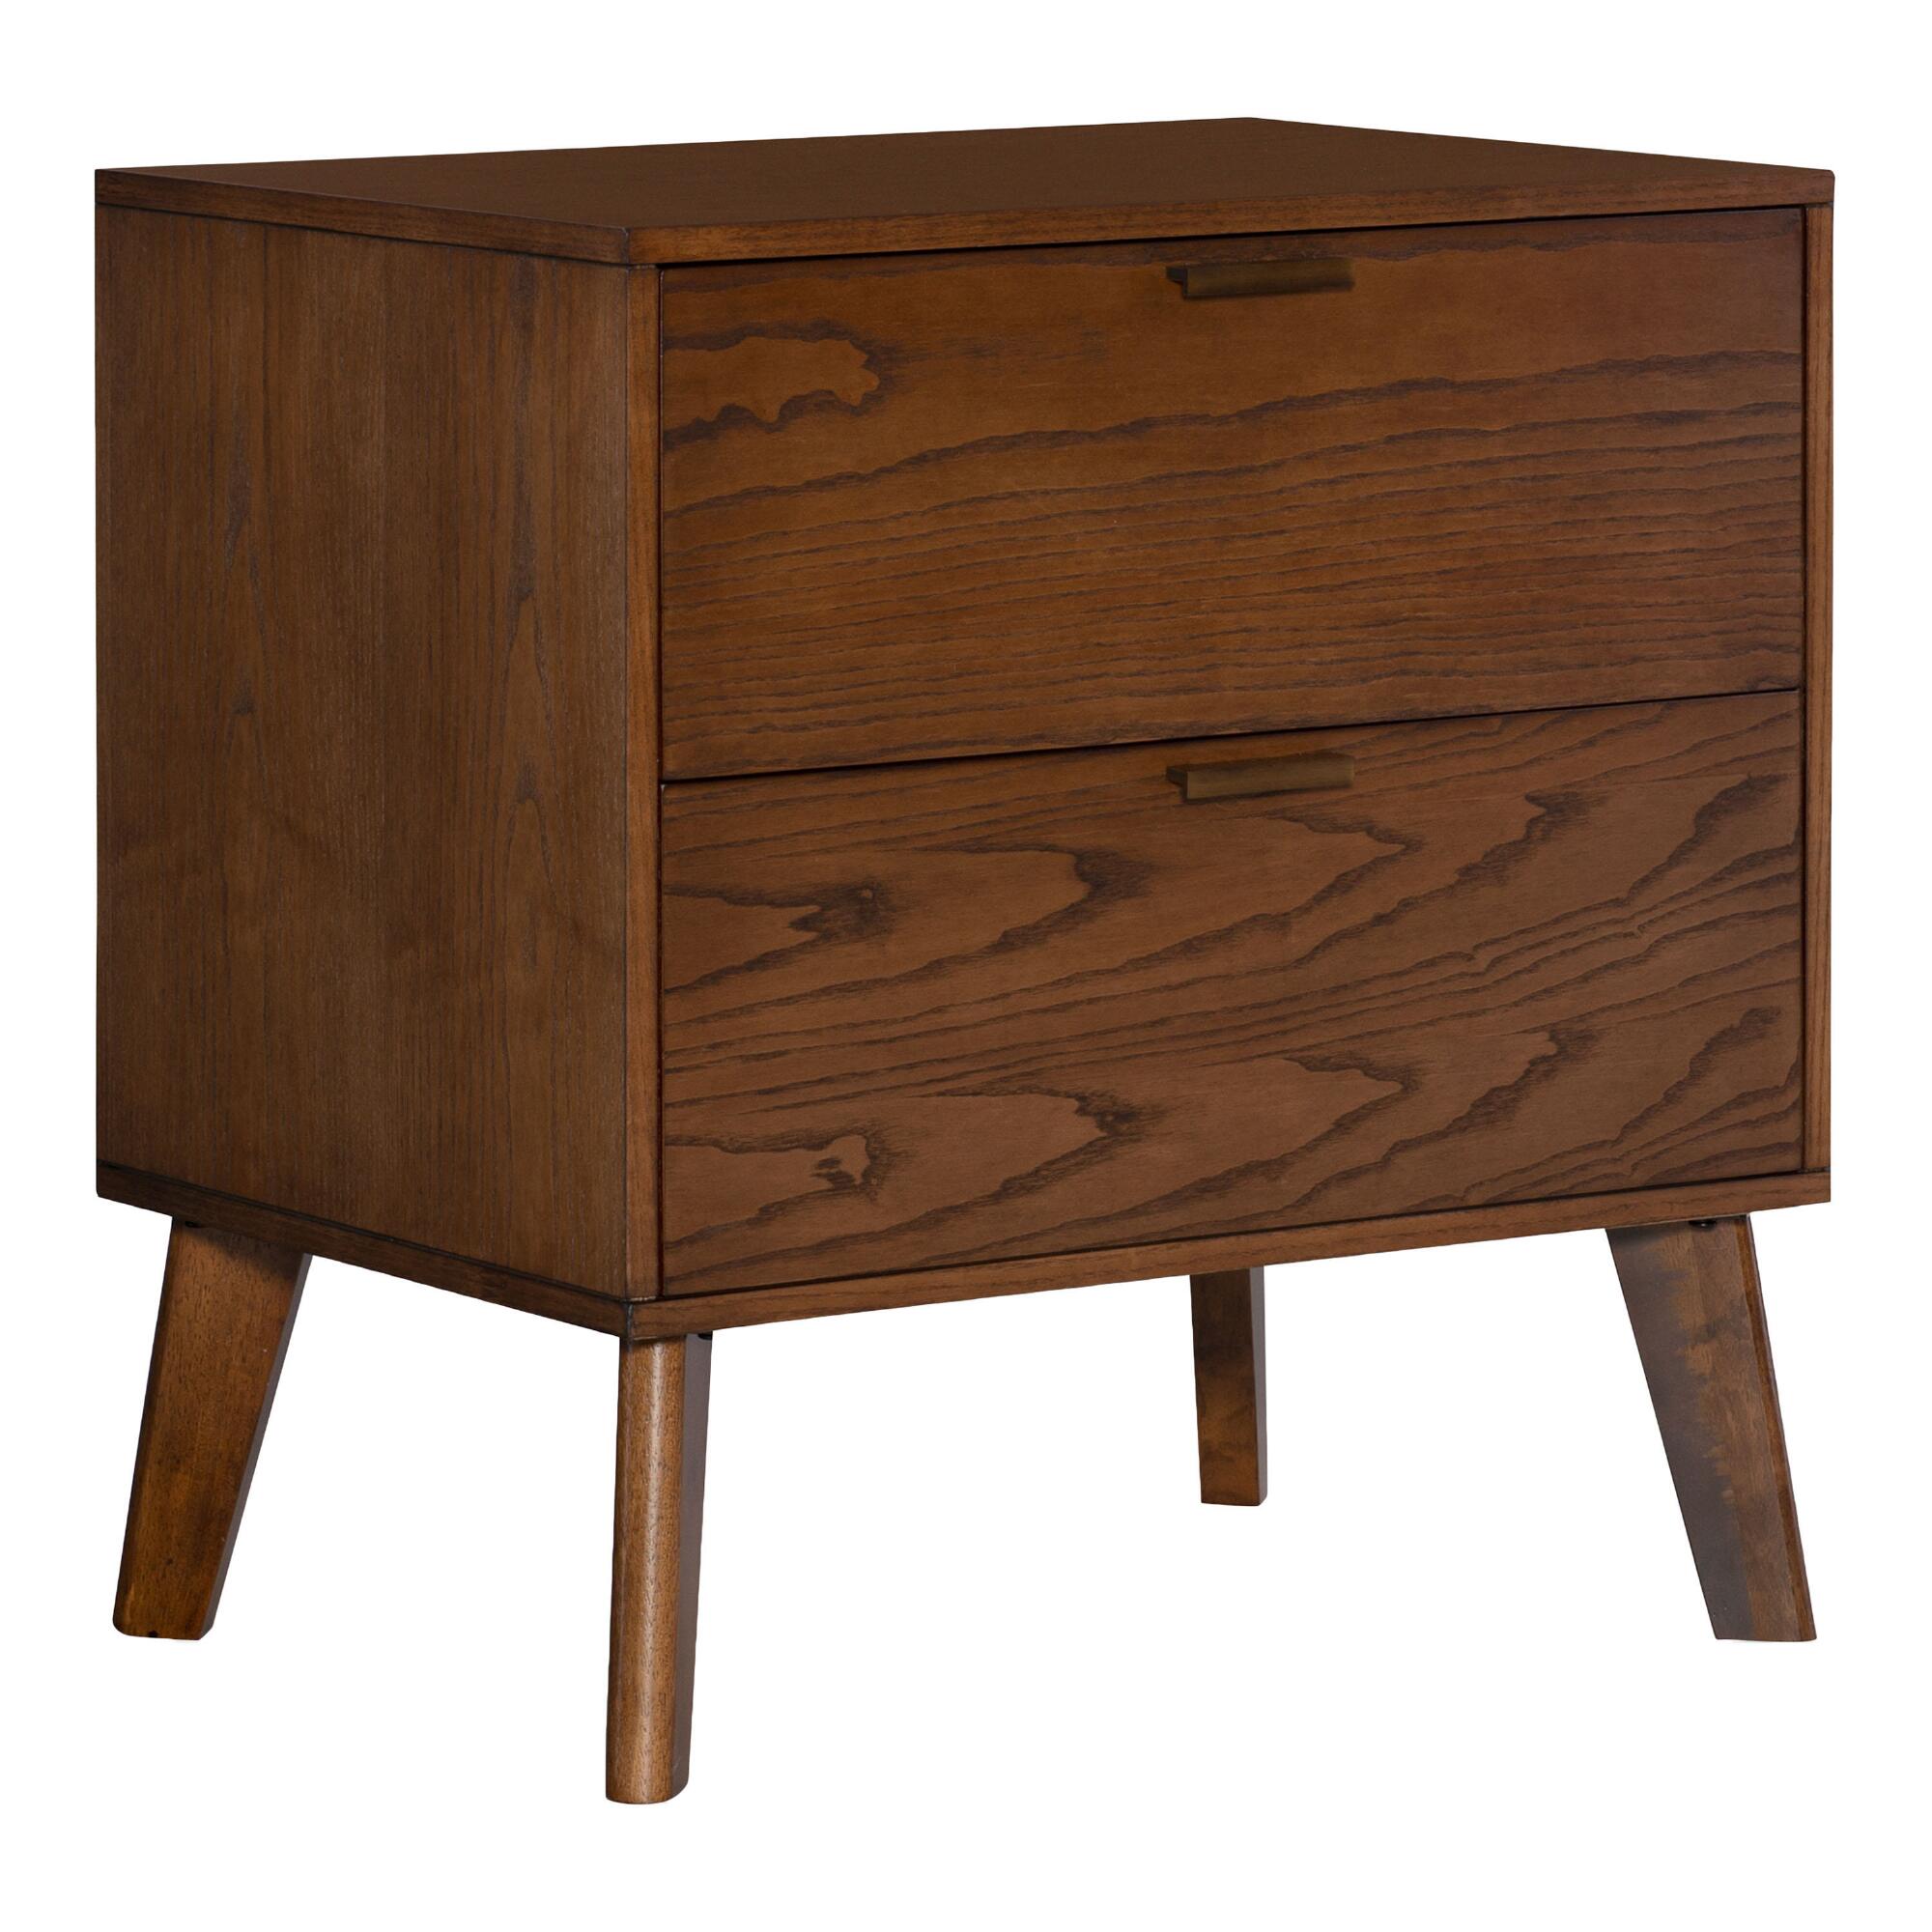 Walnut Mid Century Jackson Nightstand with 2 Drawers: Brown by World Market